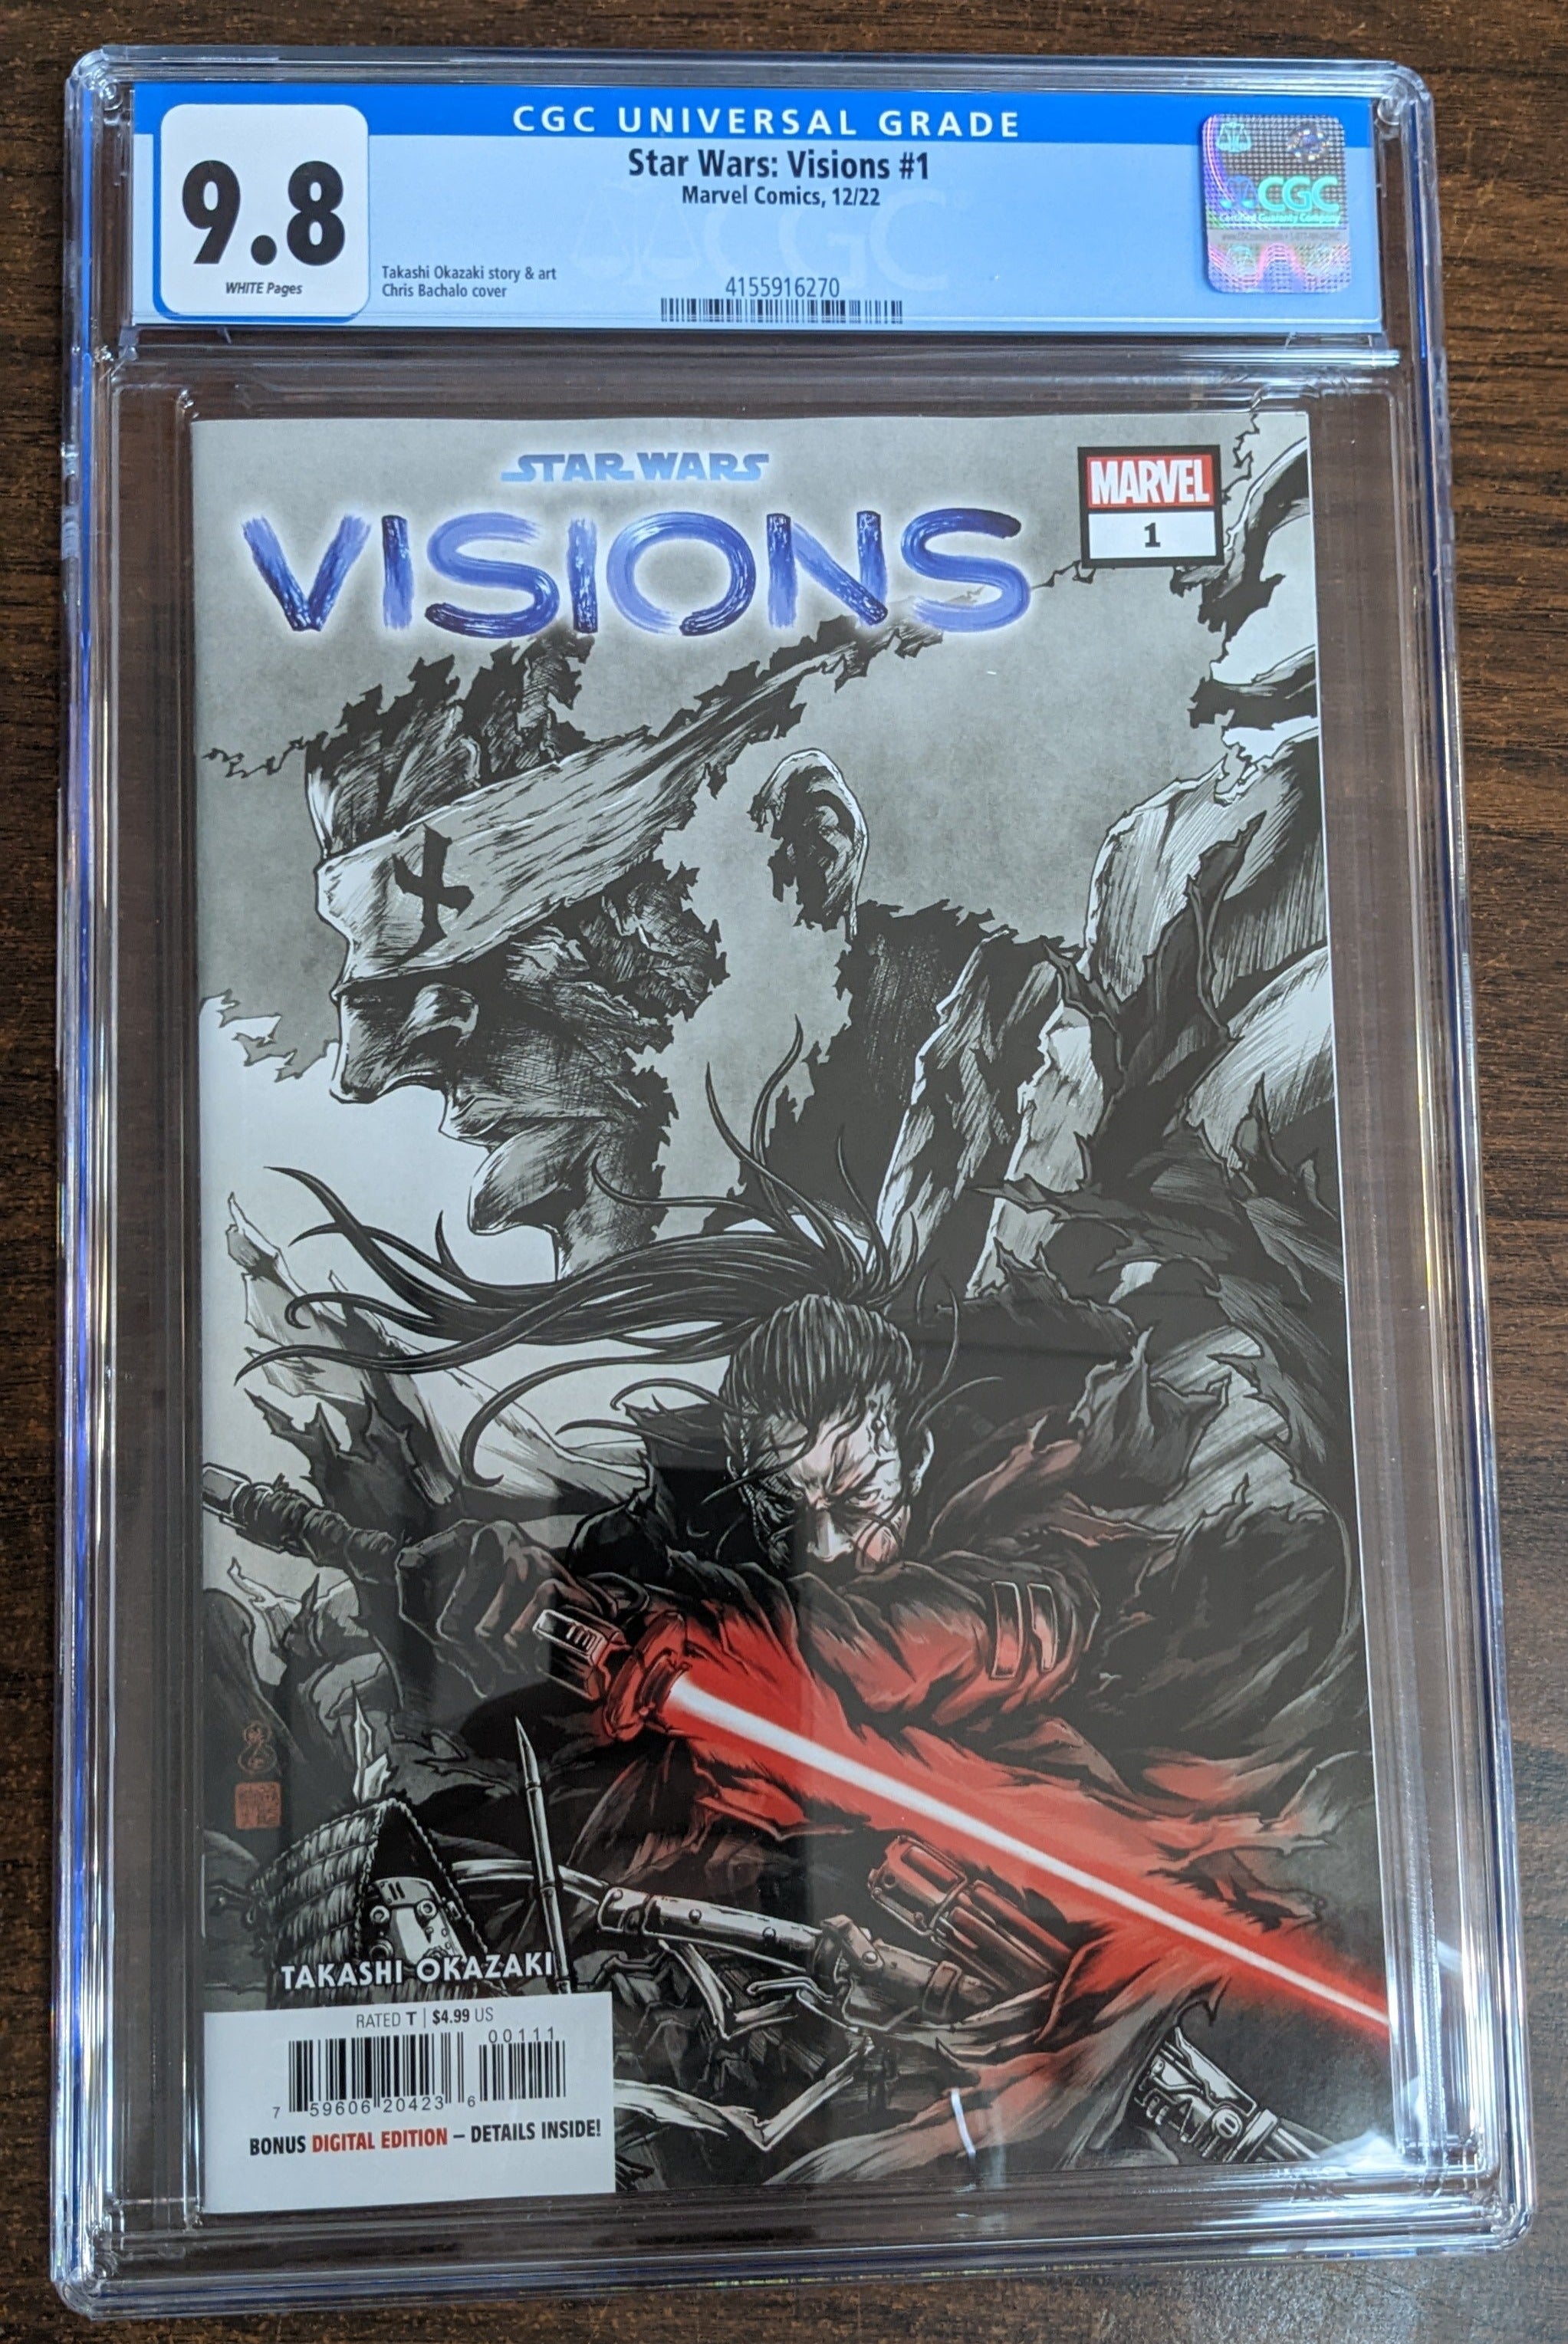 Star Wars Visions #1 Cgc Grade 9.8 1ère impression Forces dynamiques | BD Cosmos